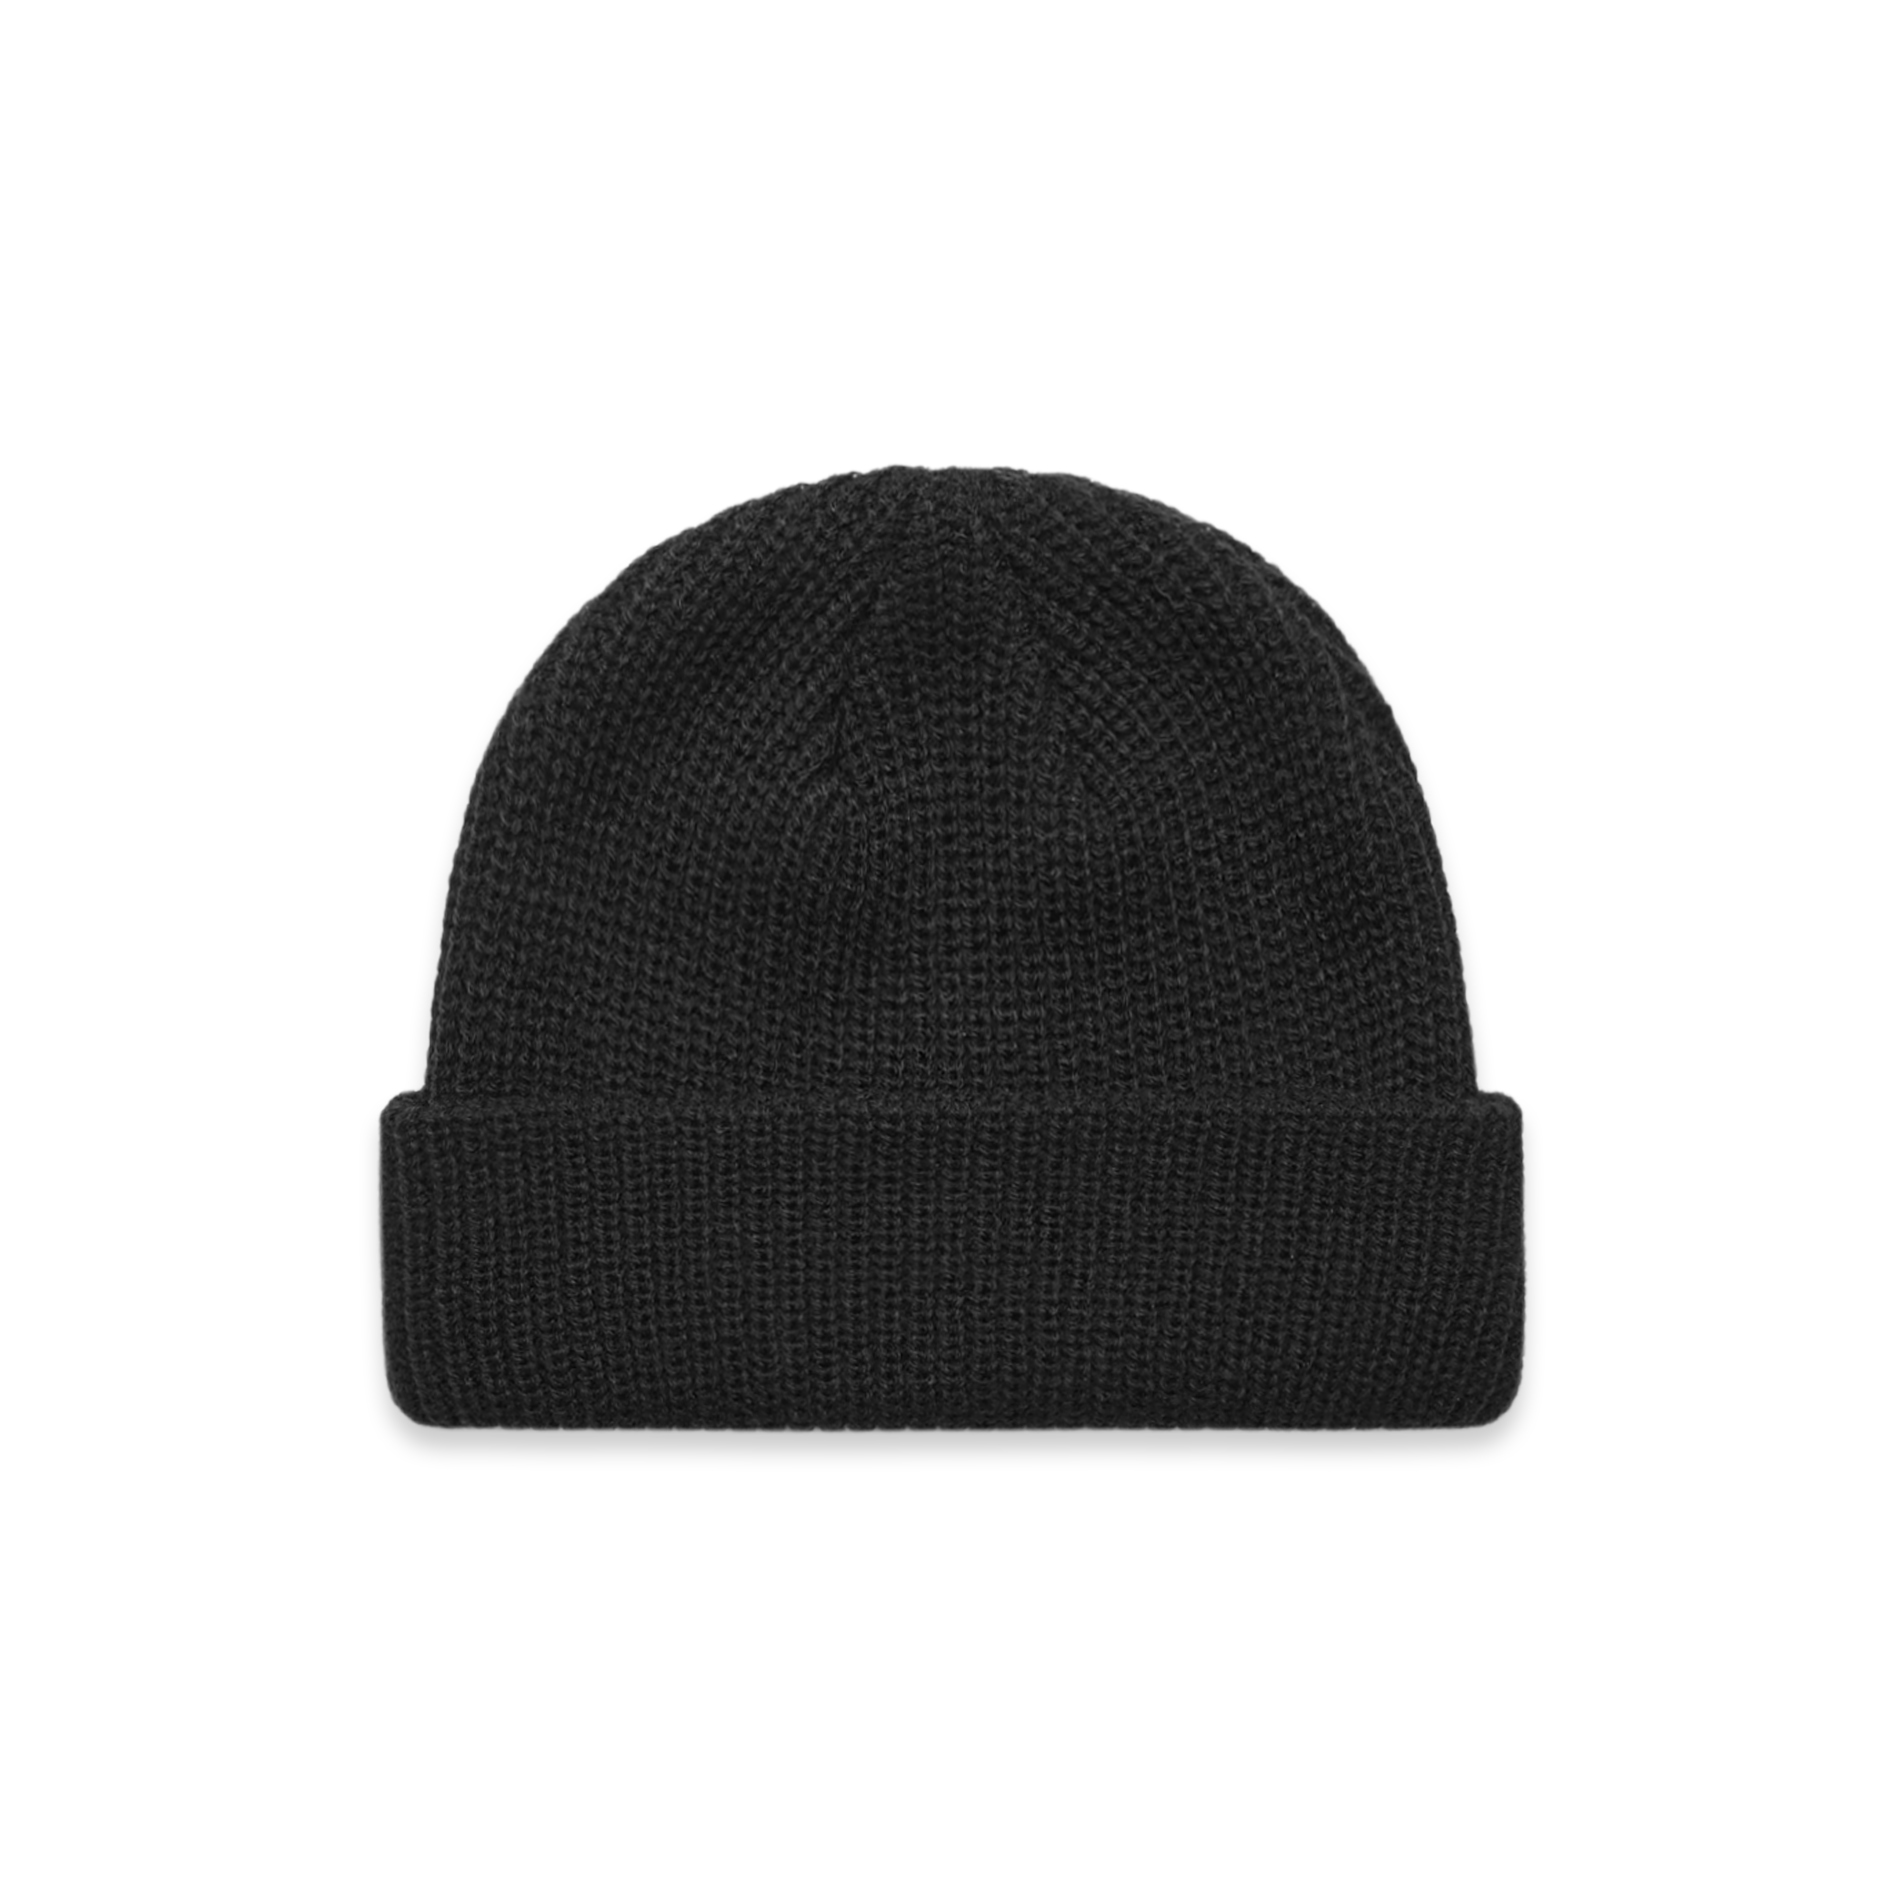 1120 CABLE BEANIE